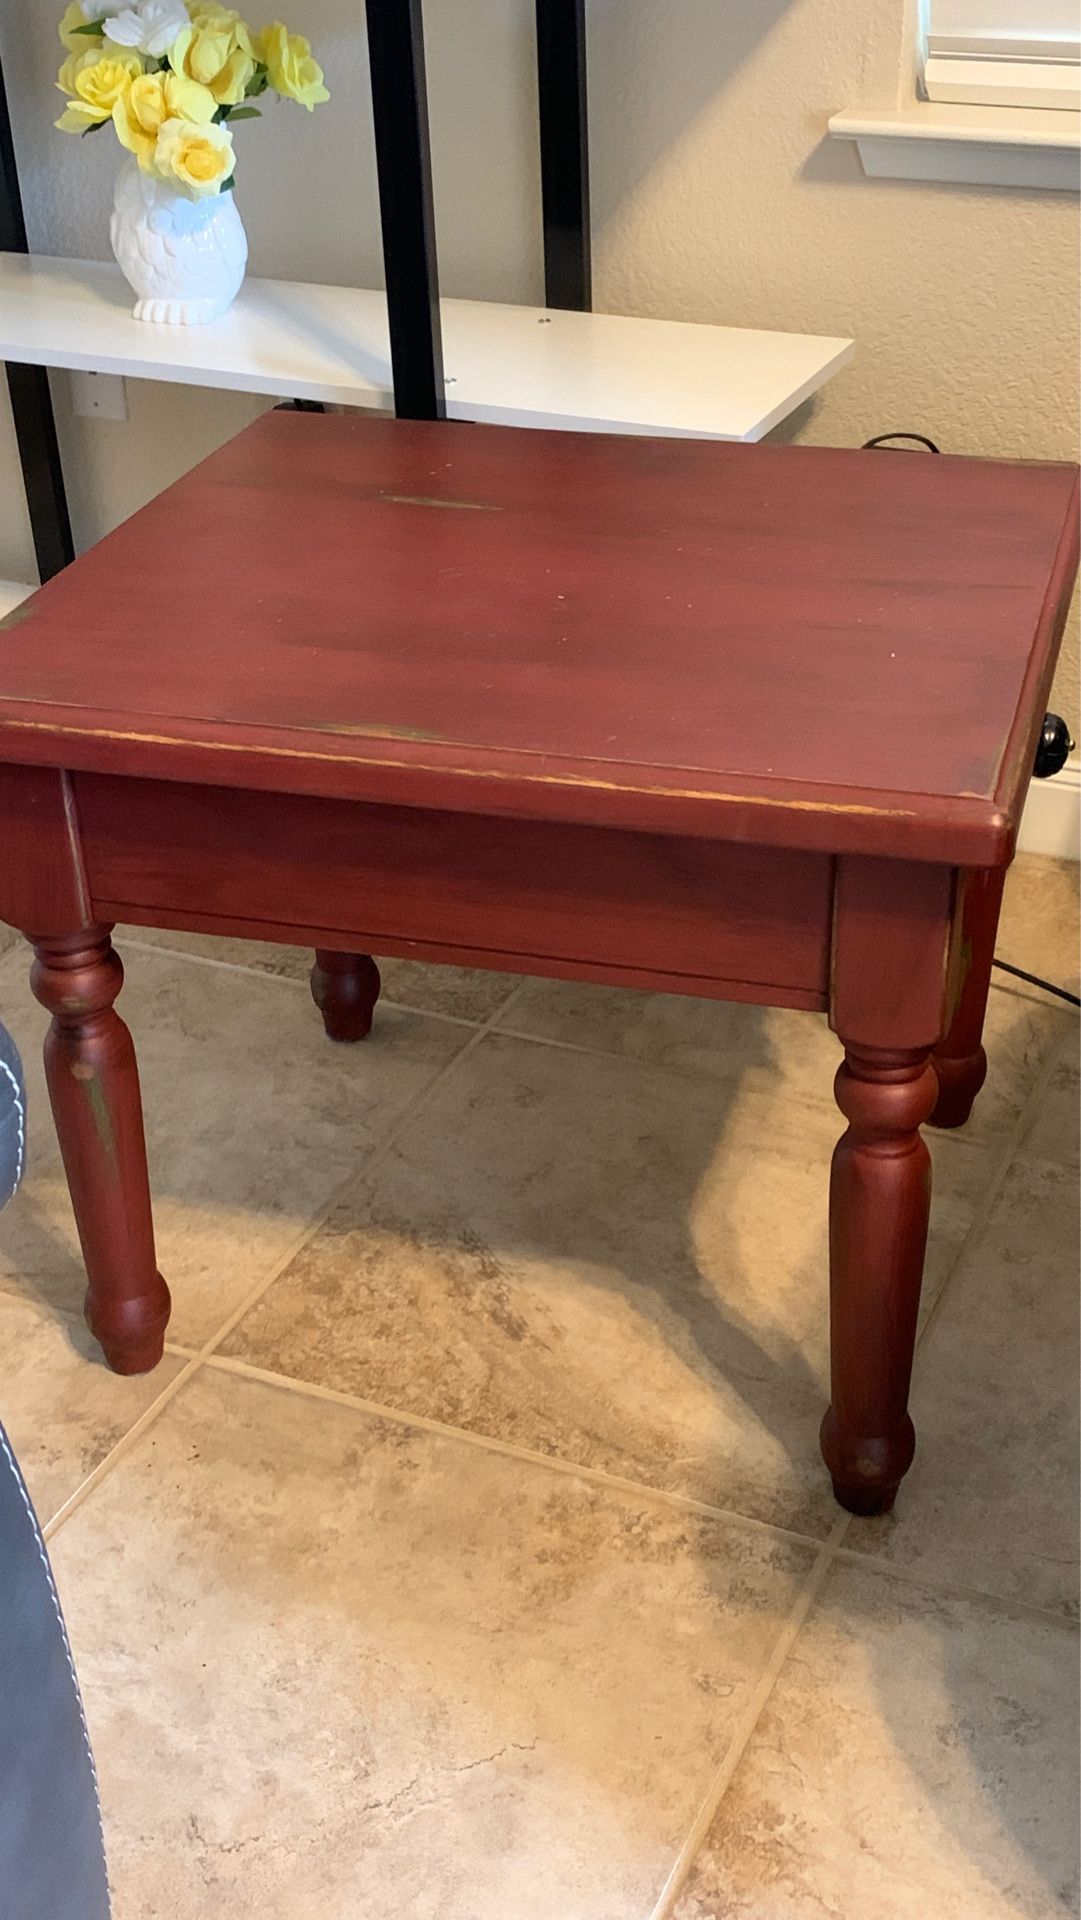 Beautiful end table burnt reddish distressed finish with drawer